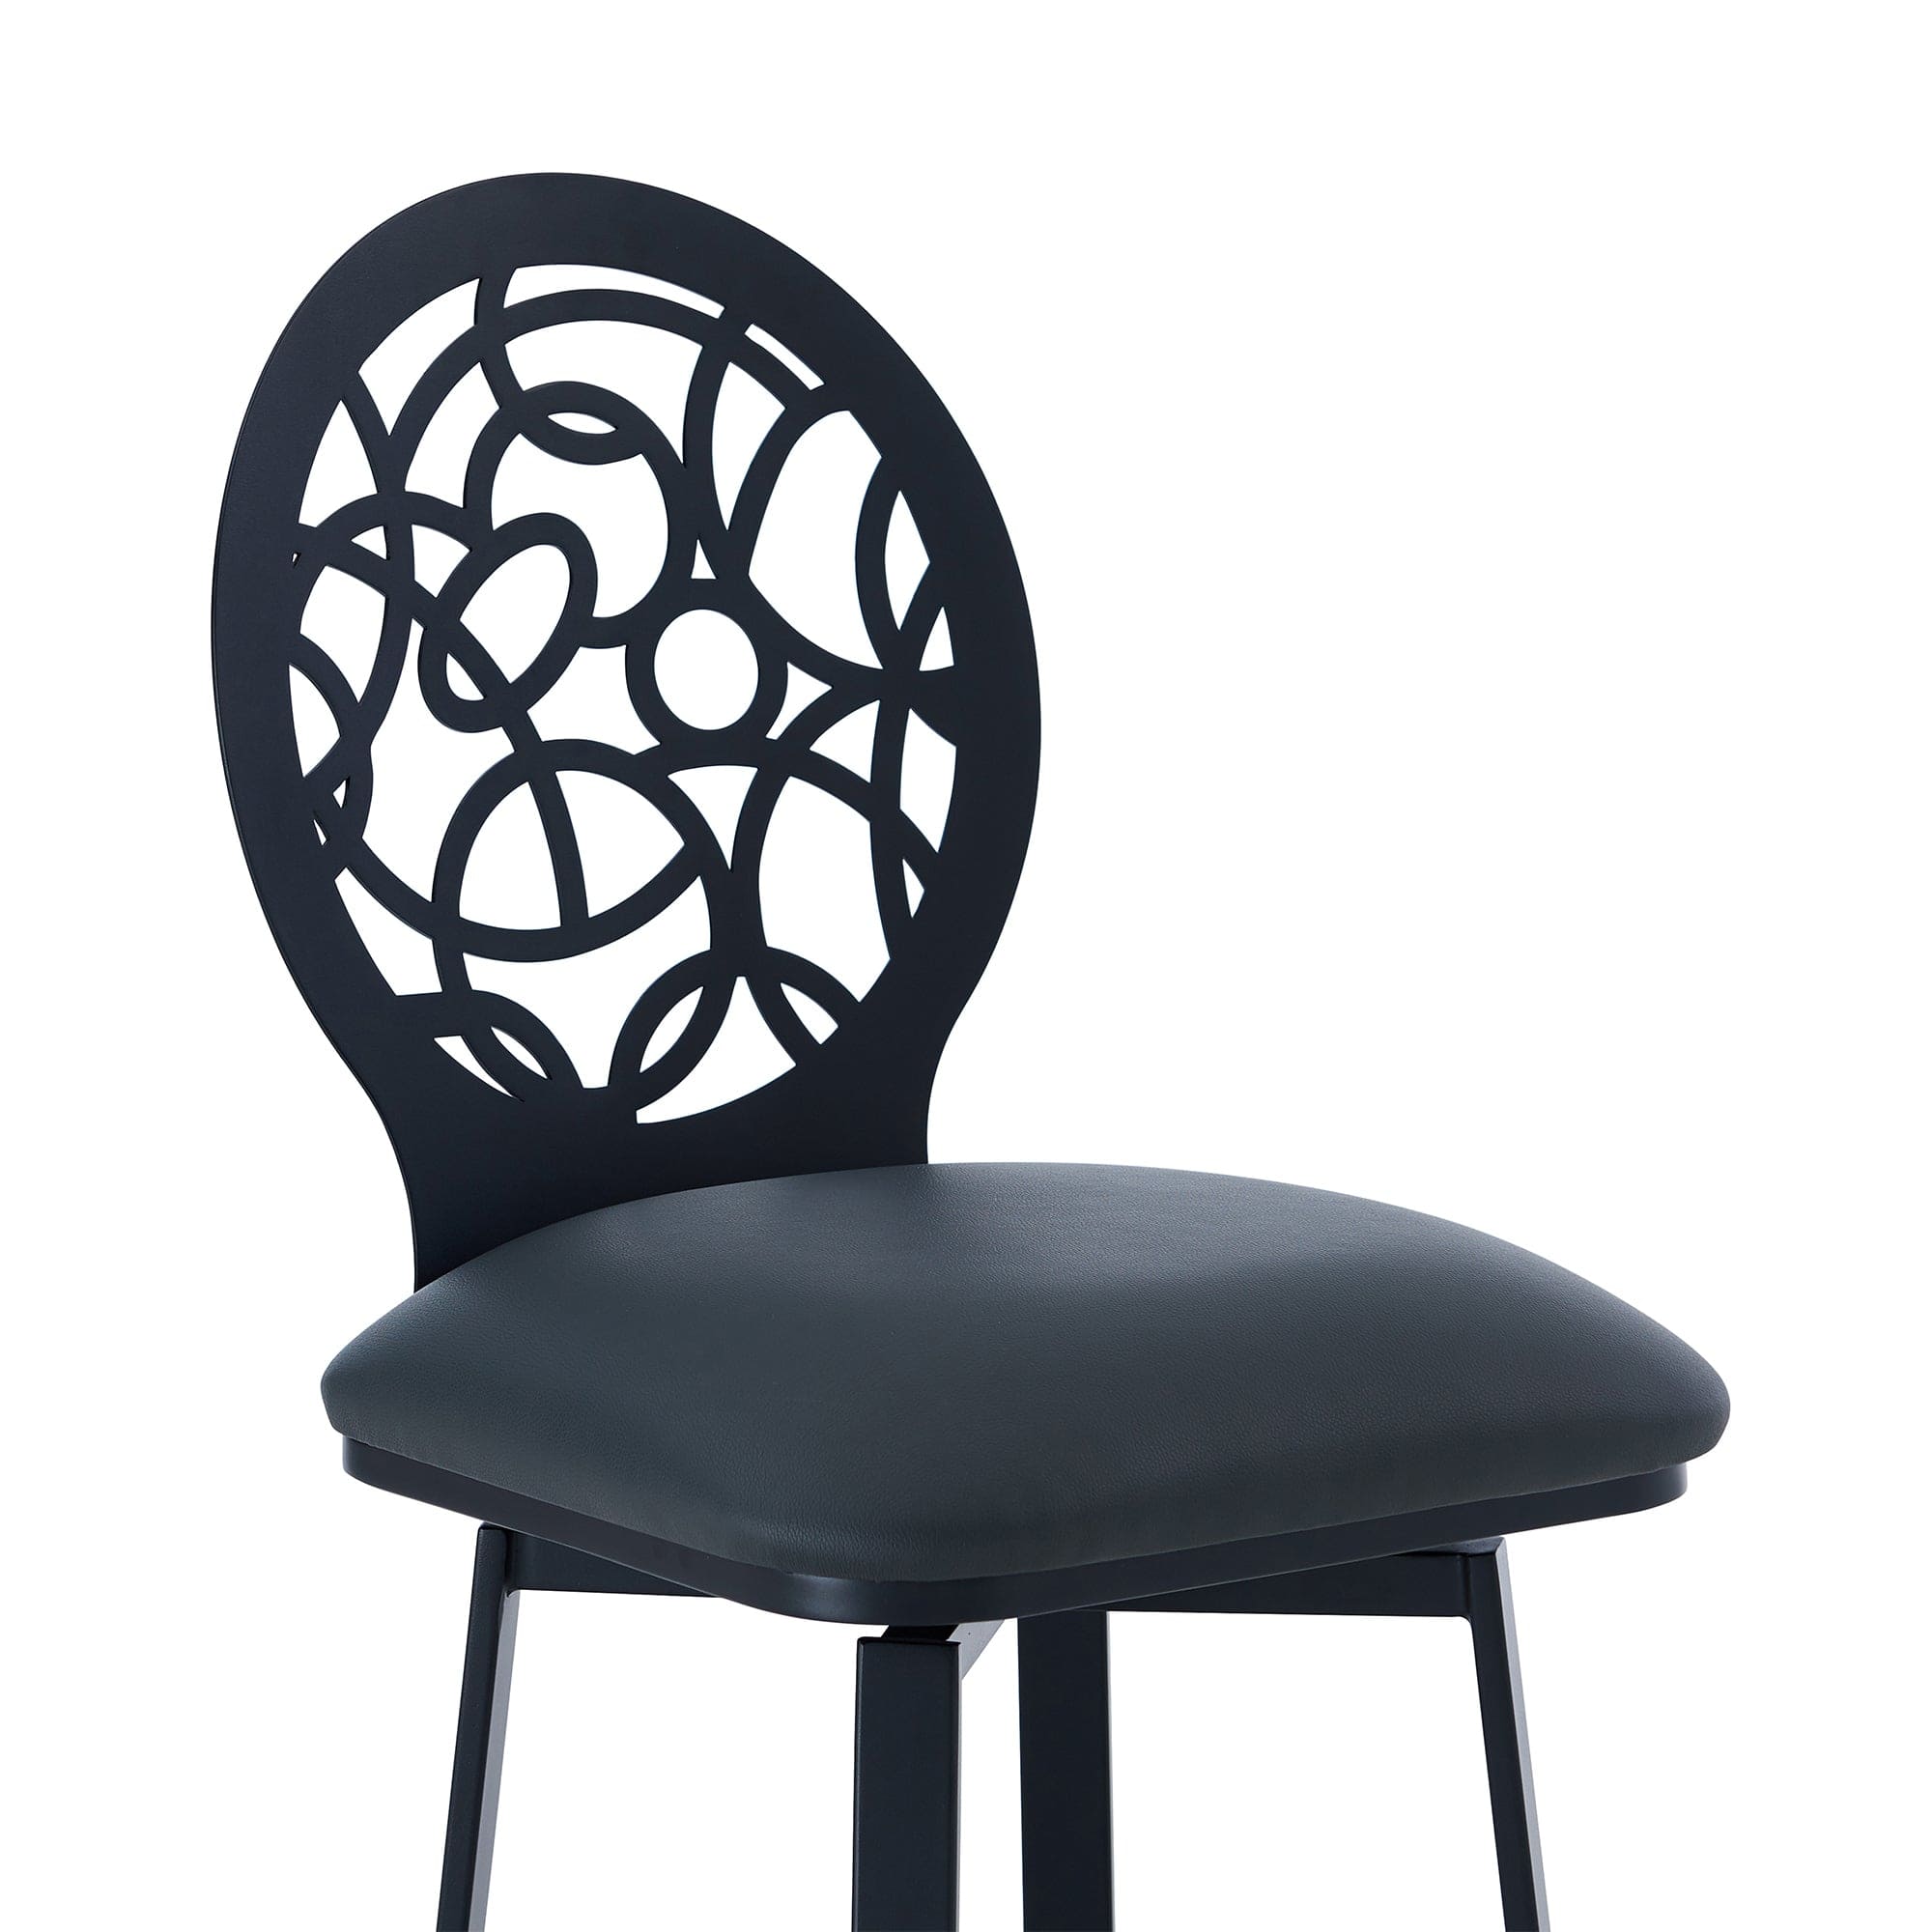 Armen Living Barstool Armen Living | Lotus Contemporary 30" Bar Height Barstool in Matte Black Finish and Gray Faux Leather | LCLTBAMBGR30